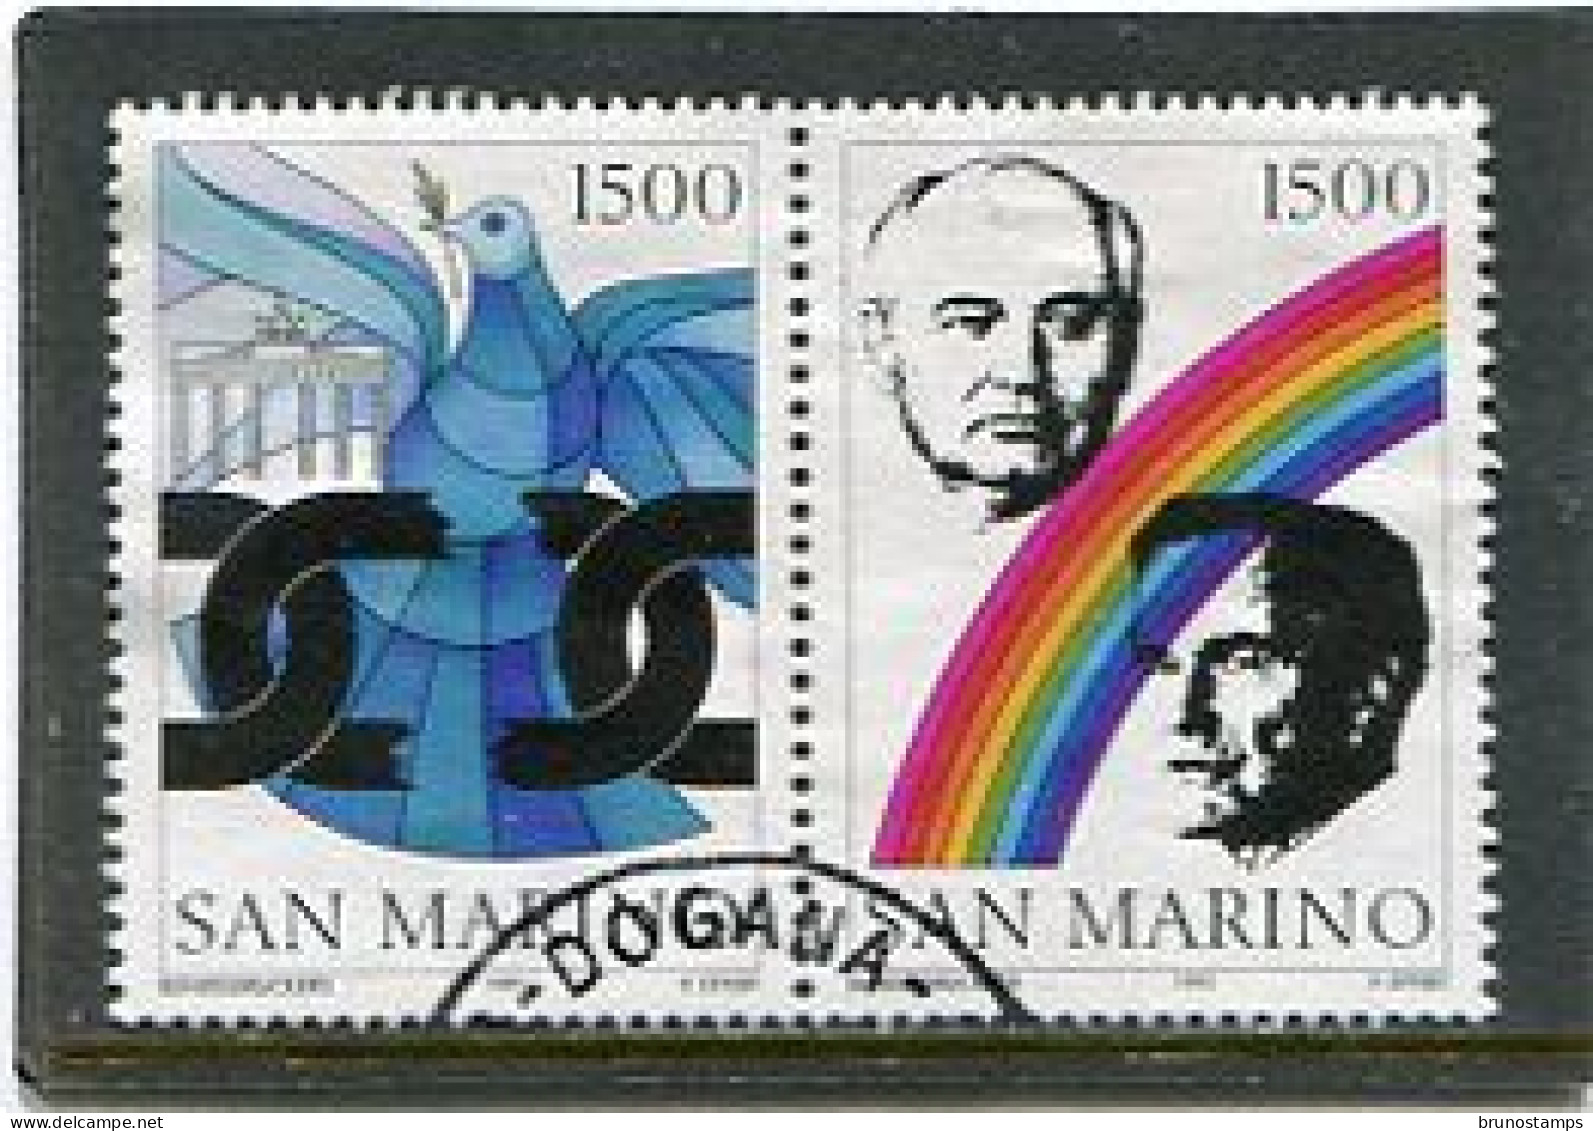 SAN MARINO - 1991   NEW EUROPA  PAIR  EX  MS  FINE USED - Used Stamps